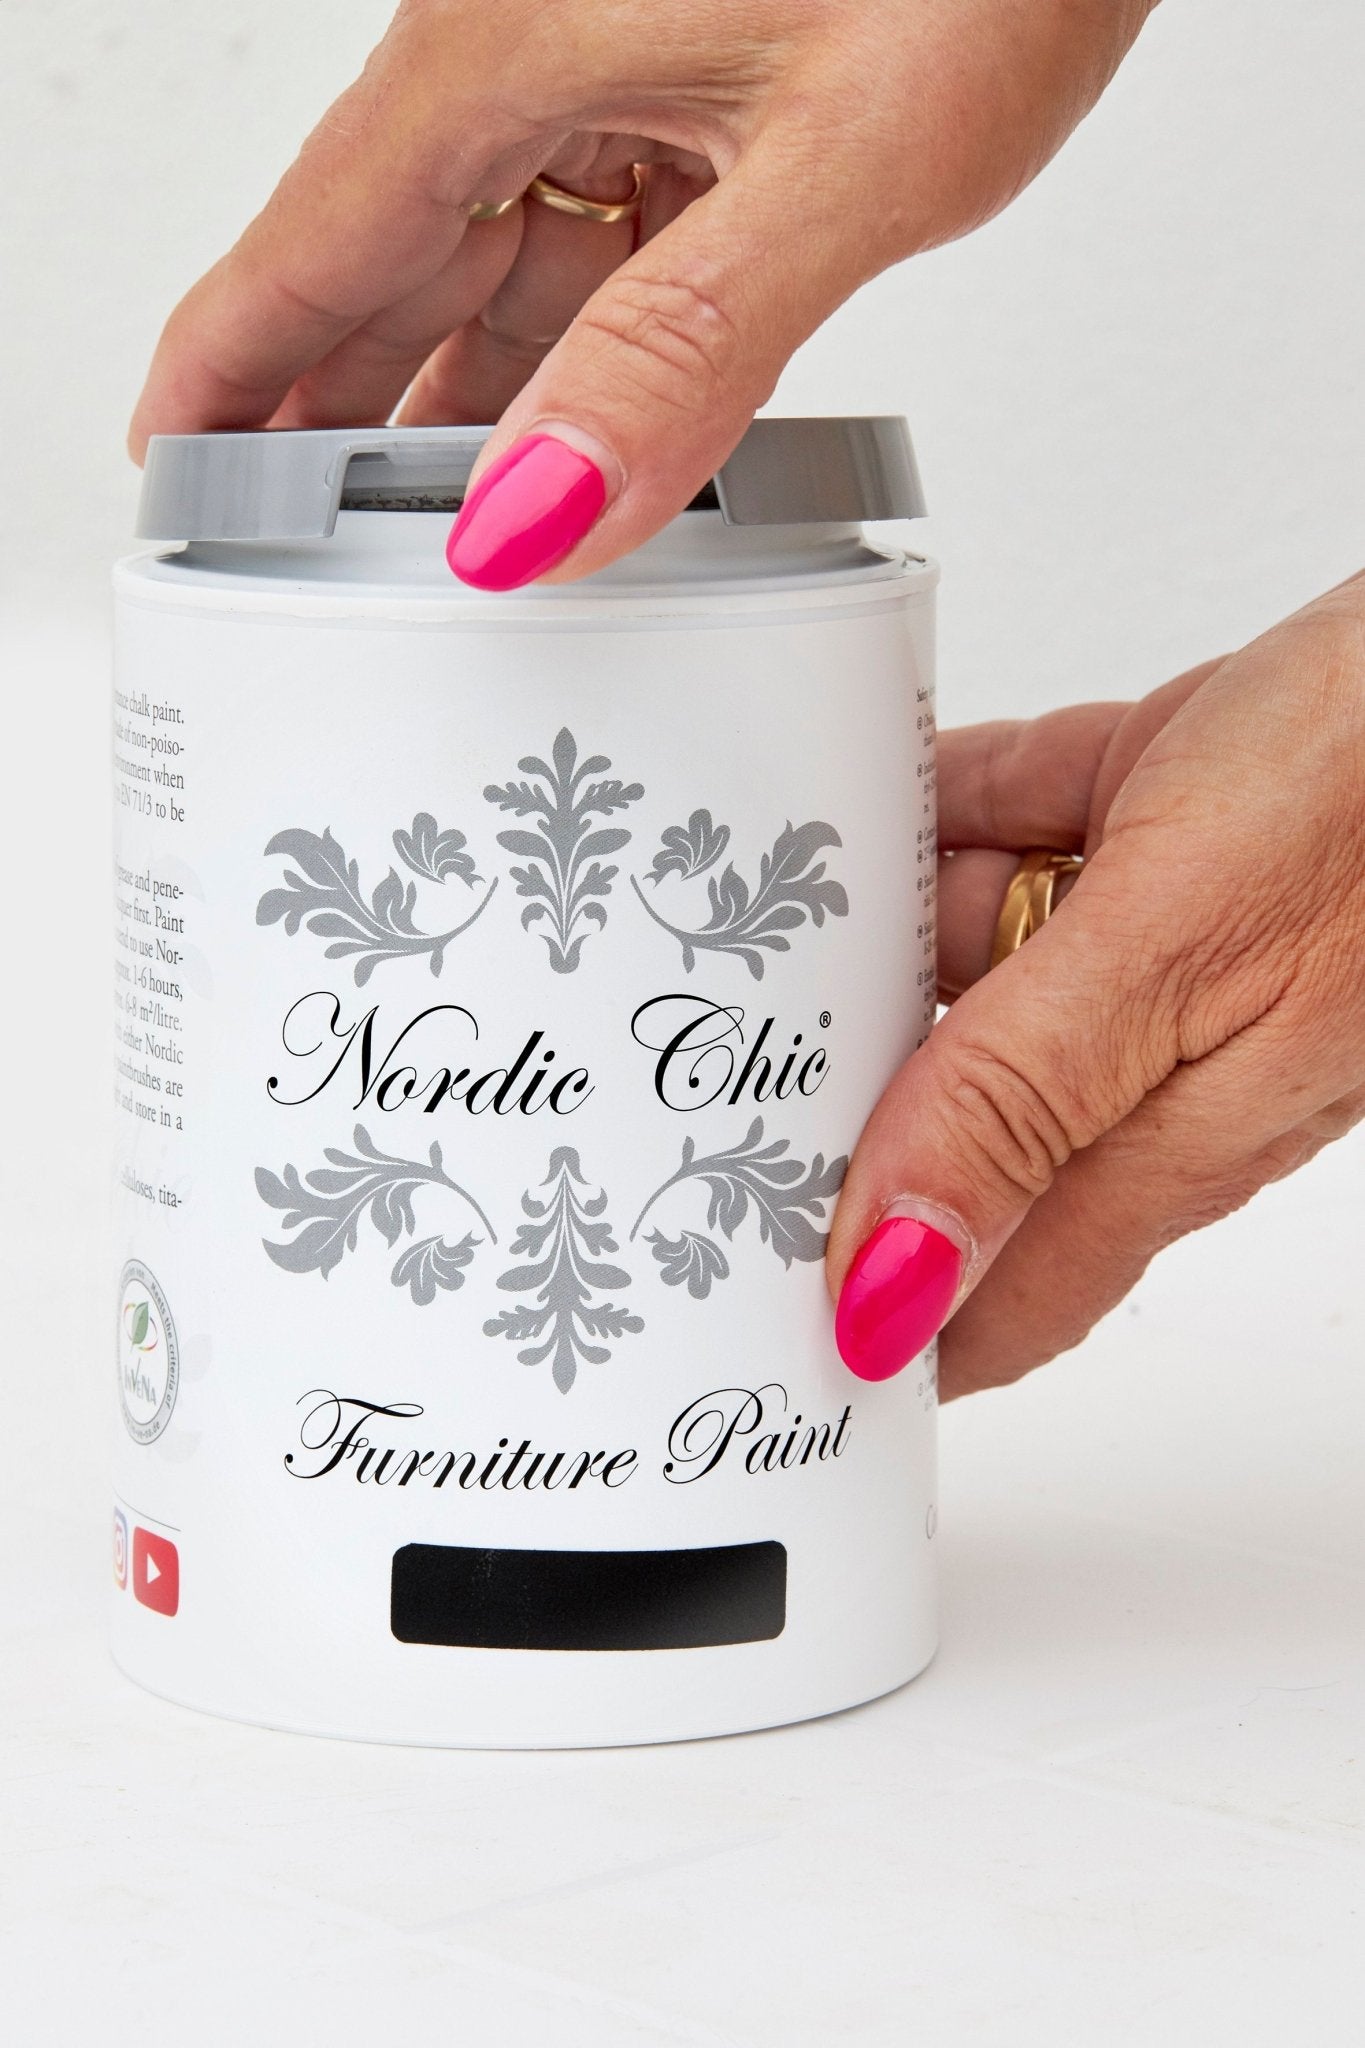 Chalkpaint - Nordic Chic®